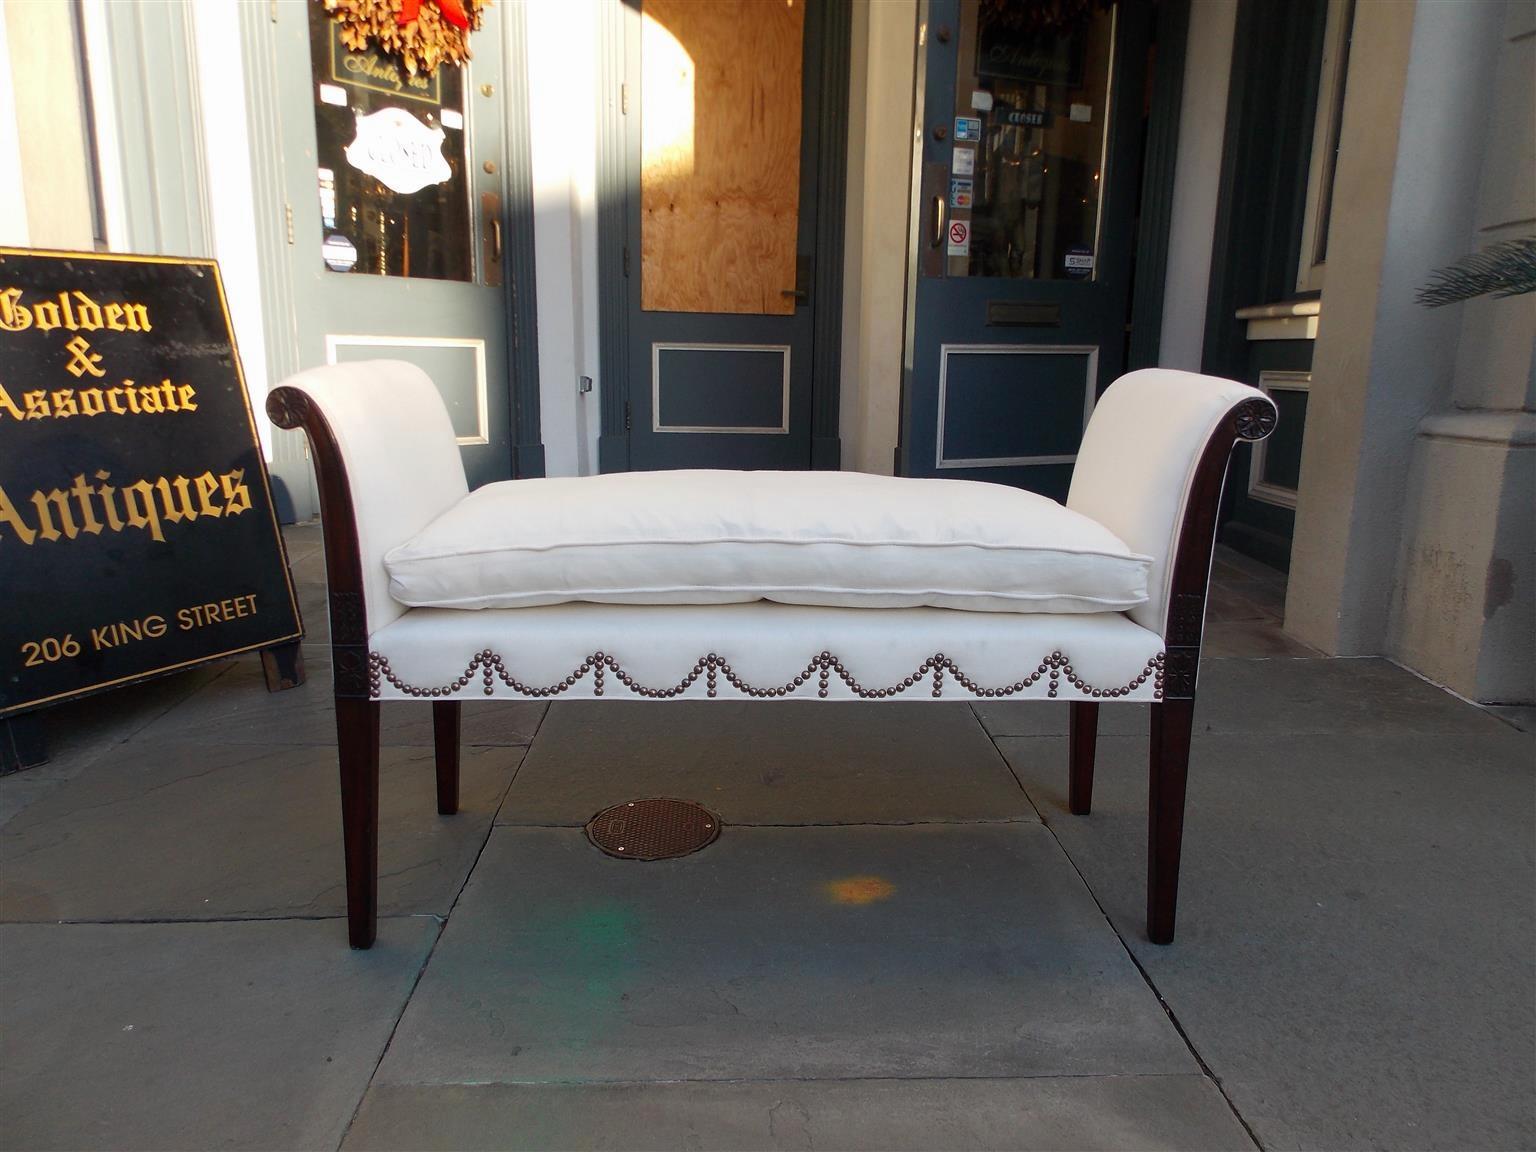 American Hepplewhite mahogany upholstered window bench with flanking scrolled arms, carved rosette medallions, padded cushion, brass swag tacks, and resting on tapered squared legs, Early 19th century. Bench is upholstered in white muslin with